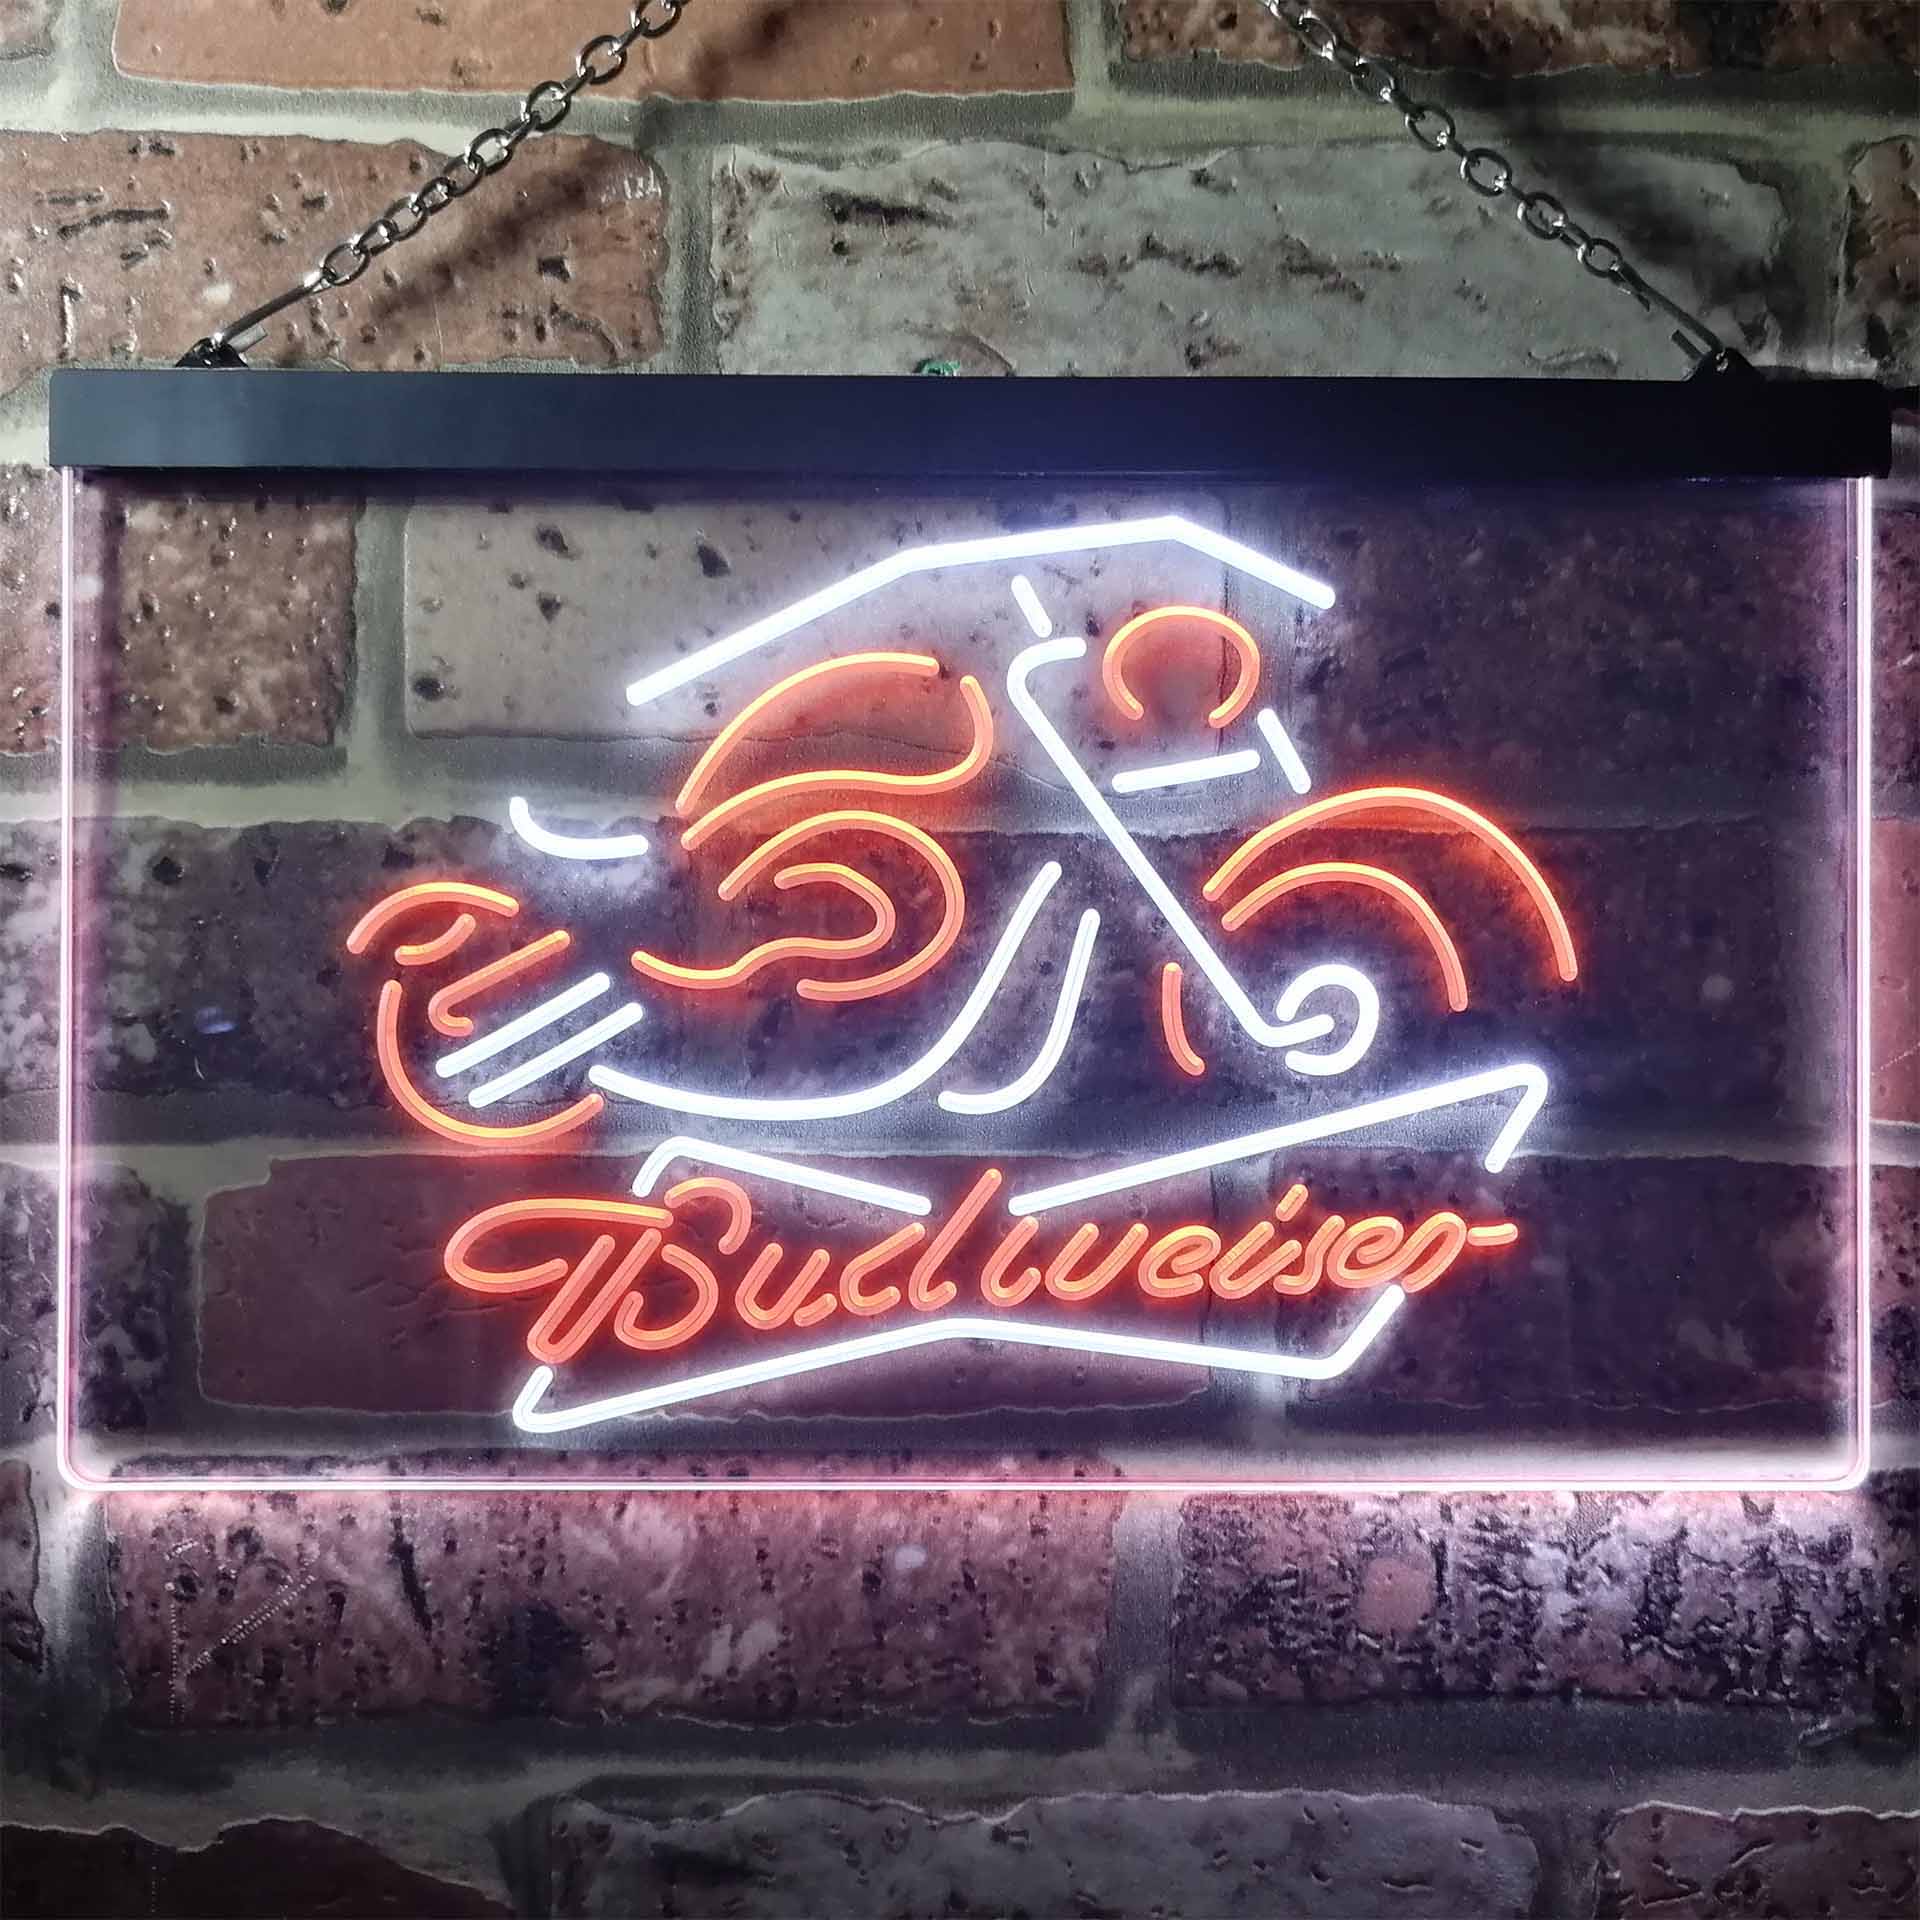 Budweiser Beer Motorcycle LED Neon Sign